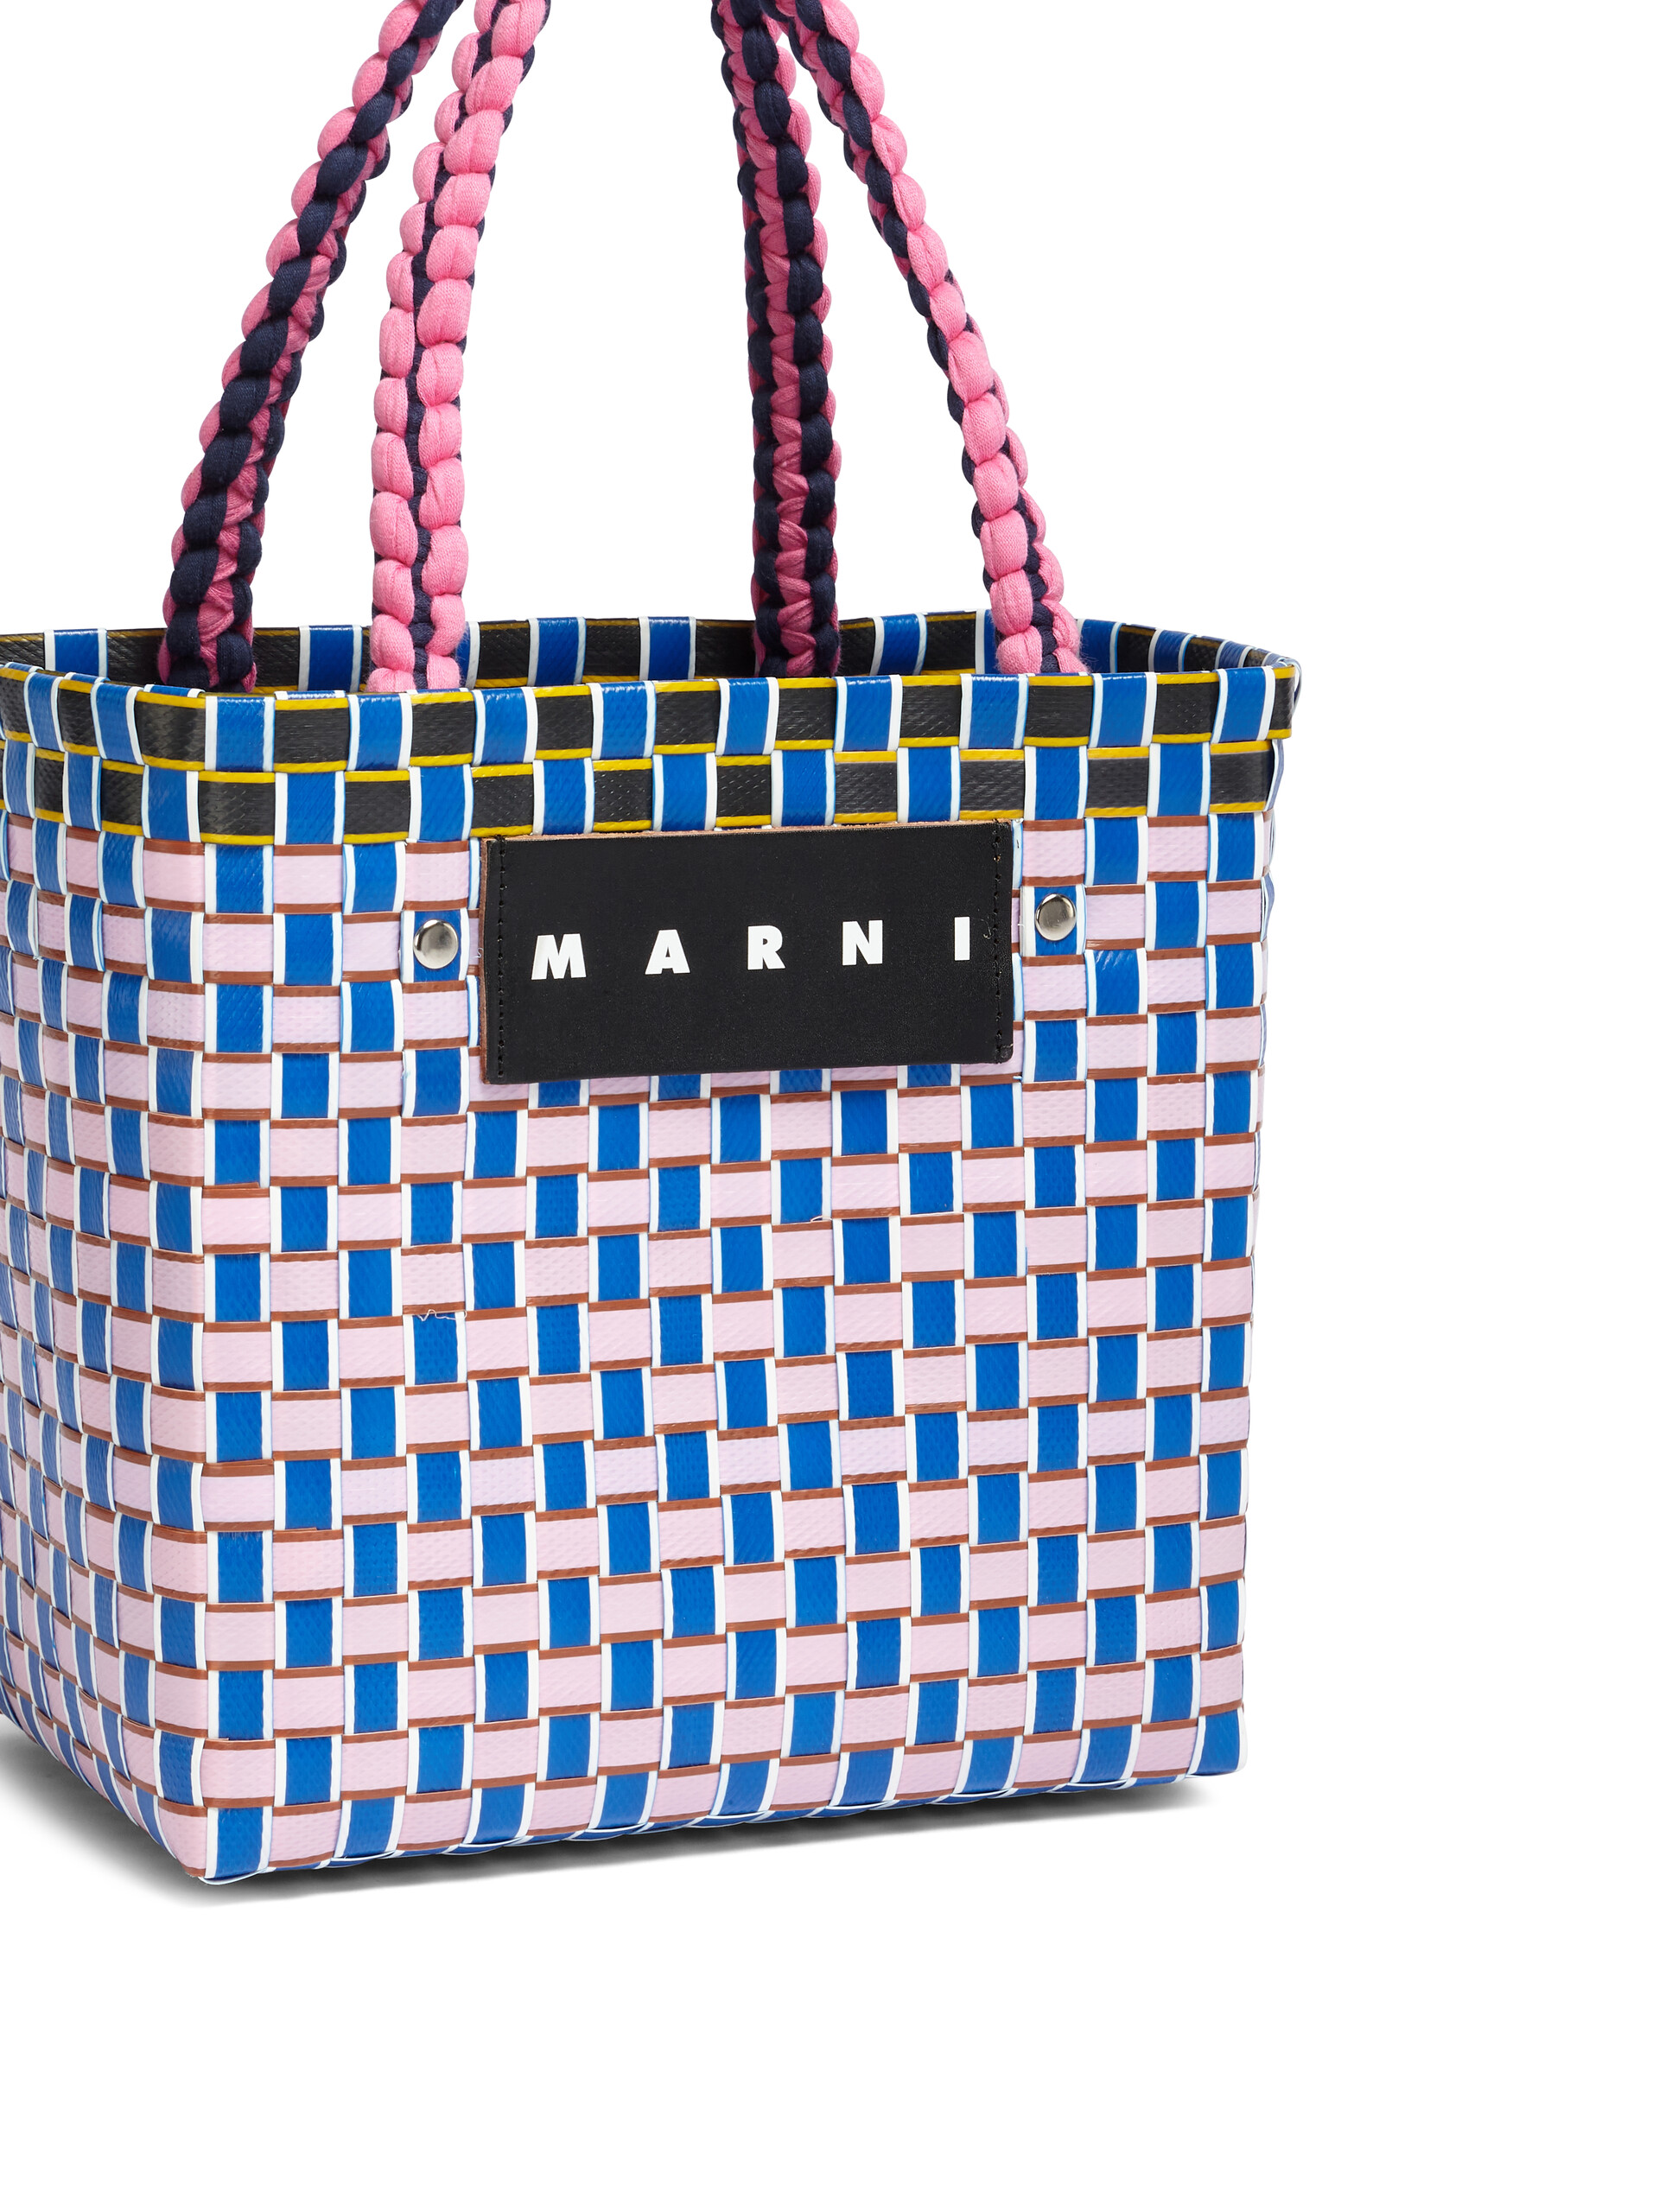 MARNI MARKET BASKET bag in pink square woven material - Bags - Image 4